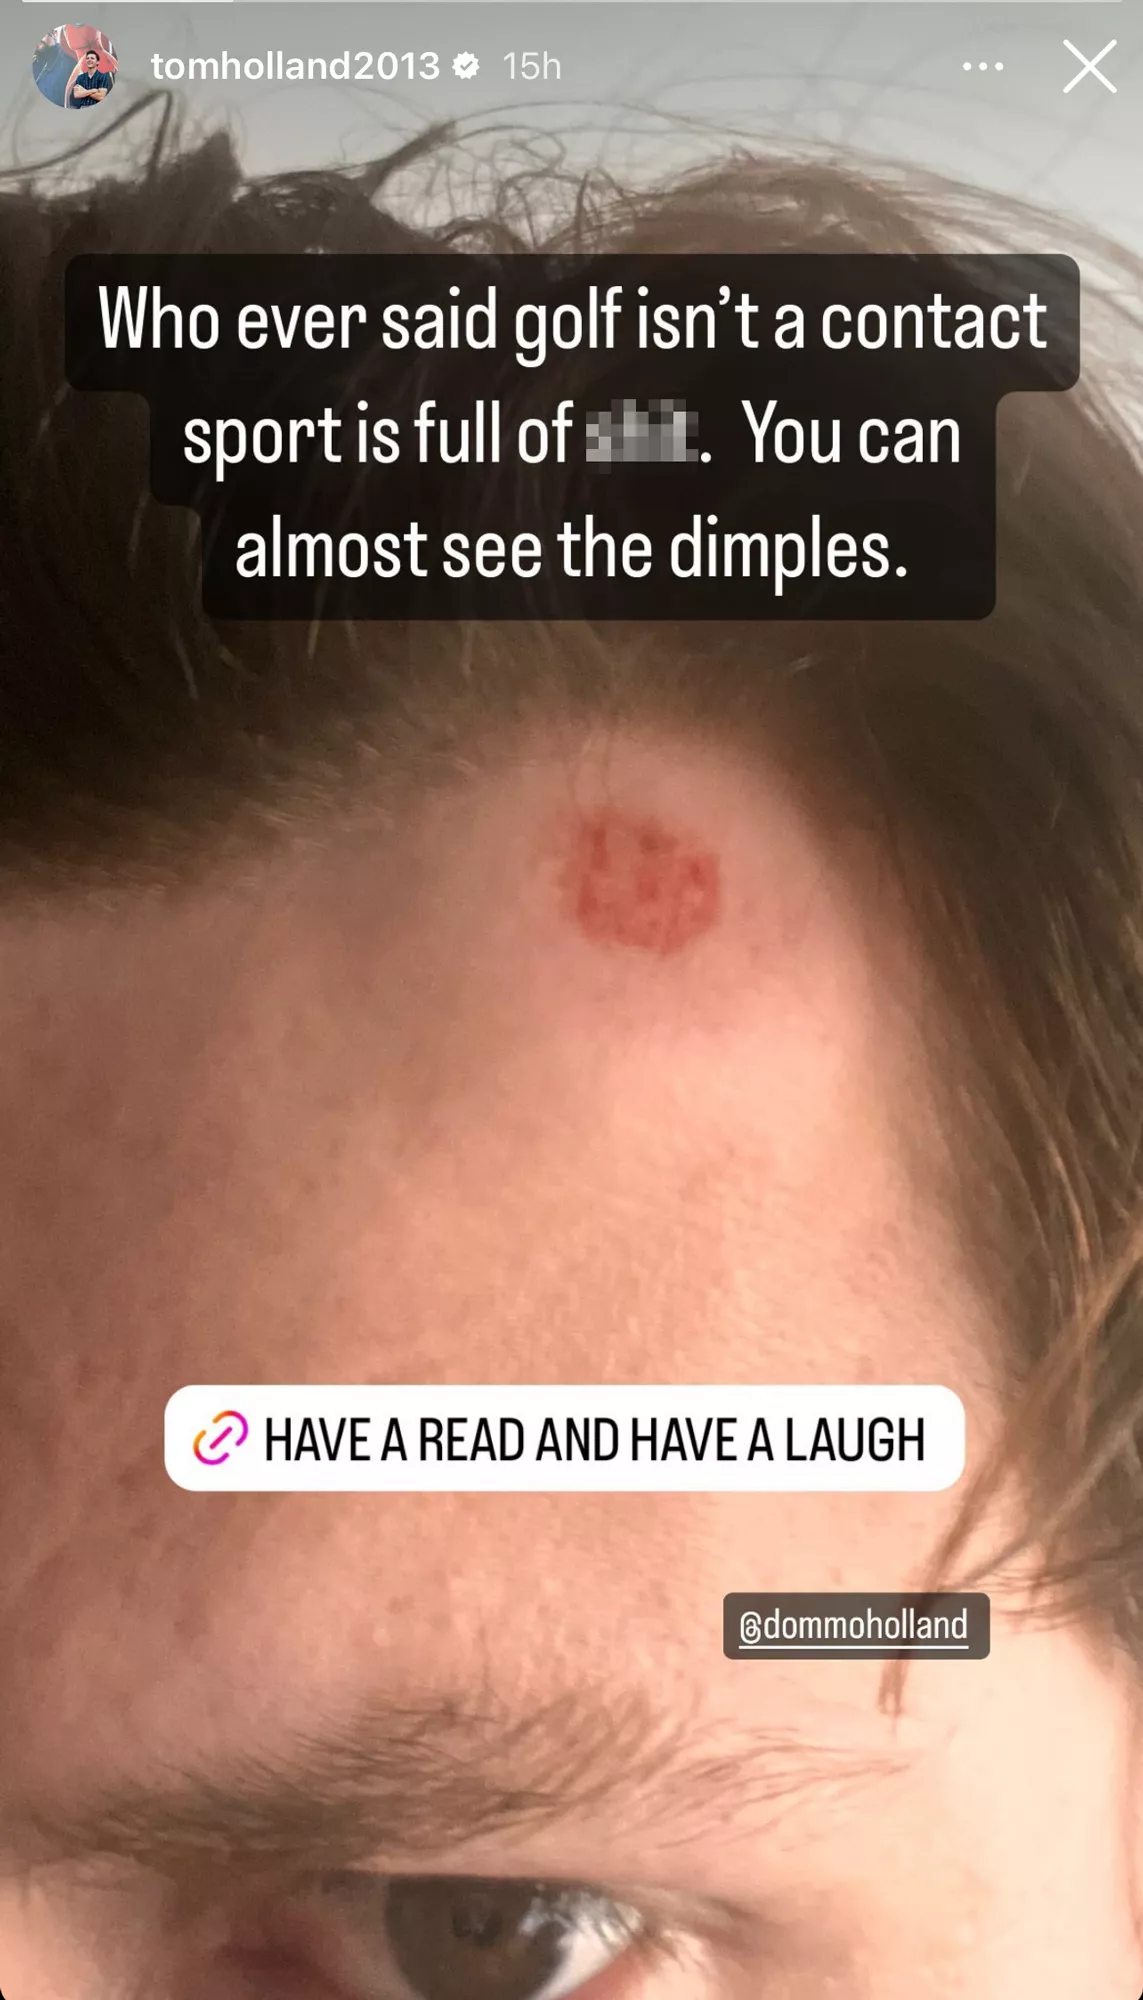 Tom Holland got hit in the forehead by a golf ball, was saved by his ‘wooly hat’